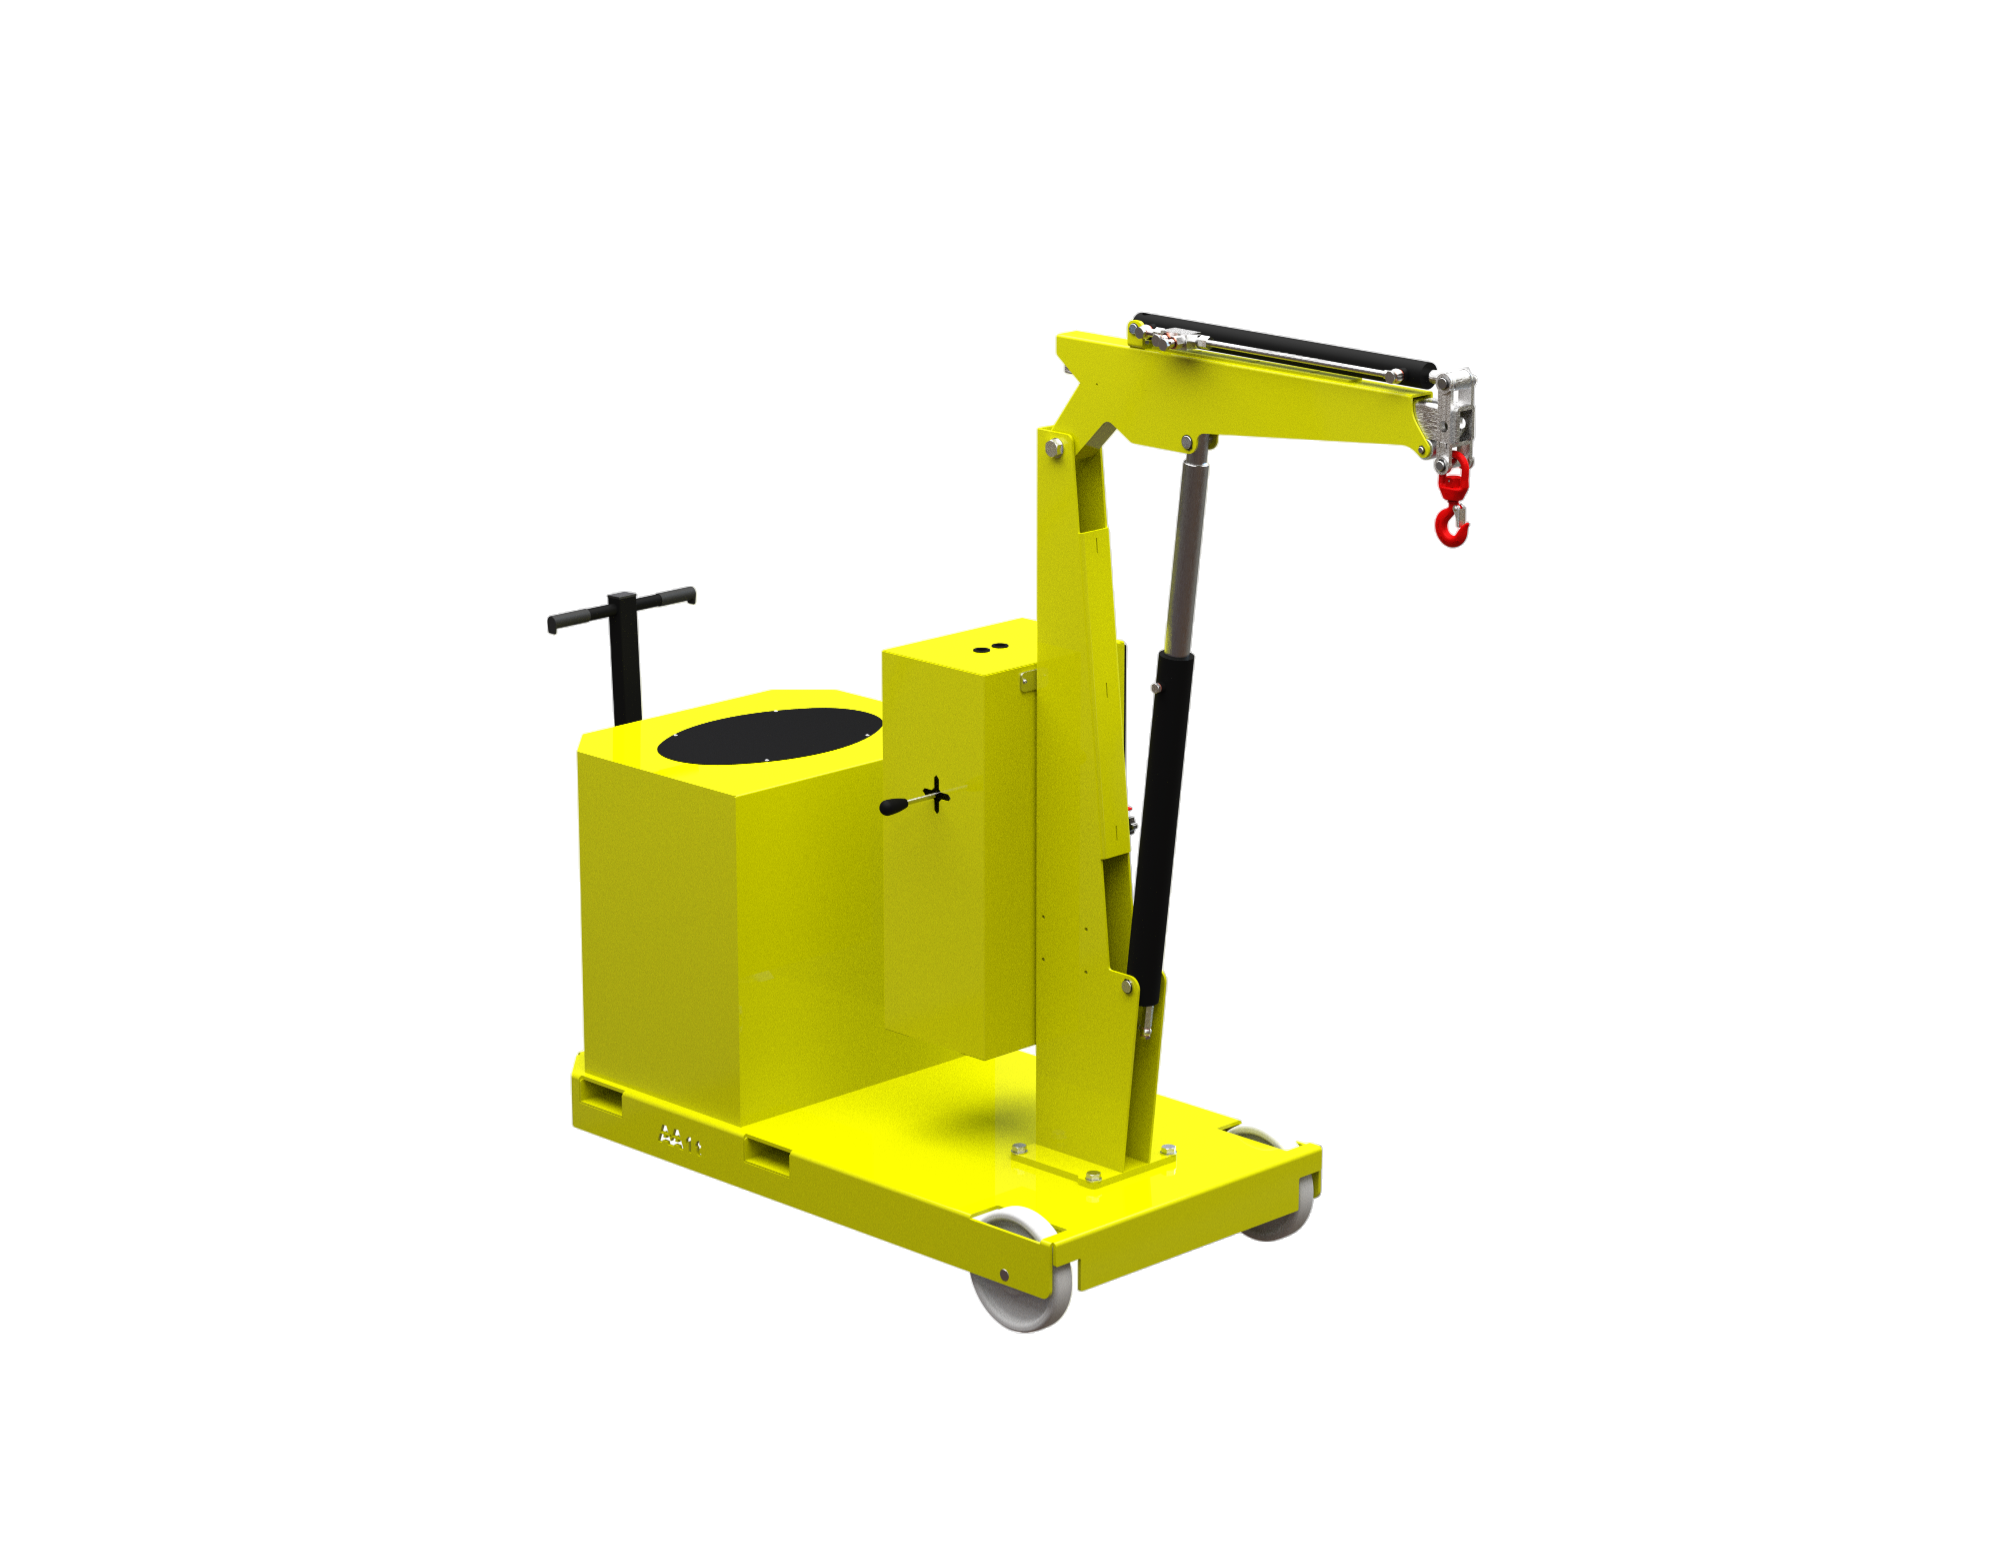 GZ1000BSE mini crane with telescopic arm with electric extension lifting capacity 1,000 kg